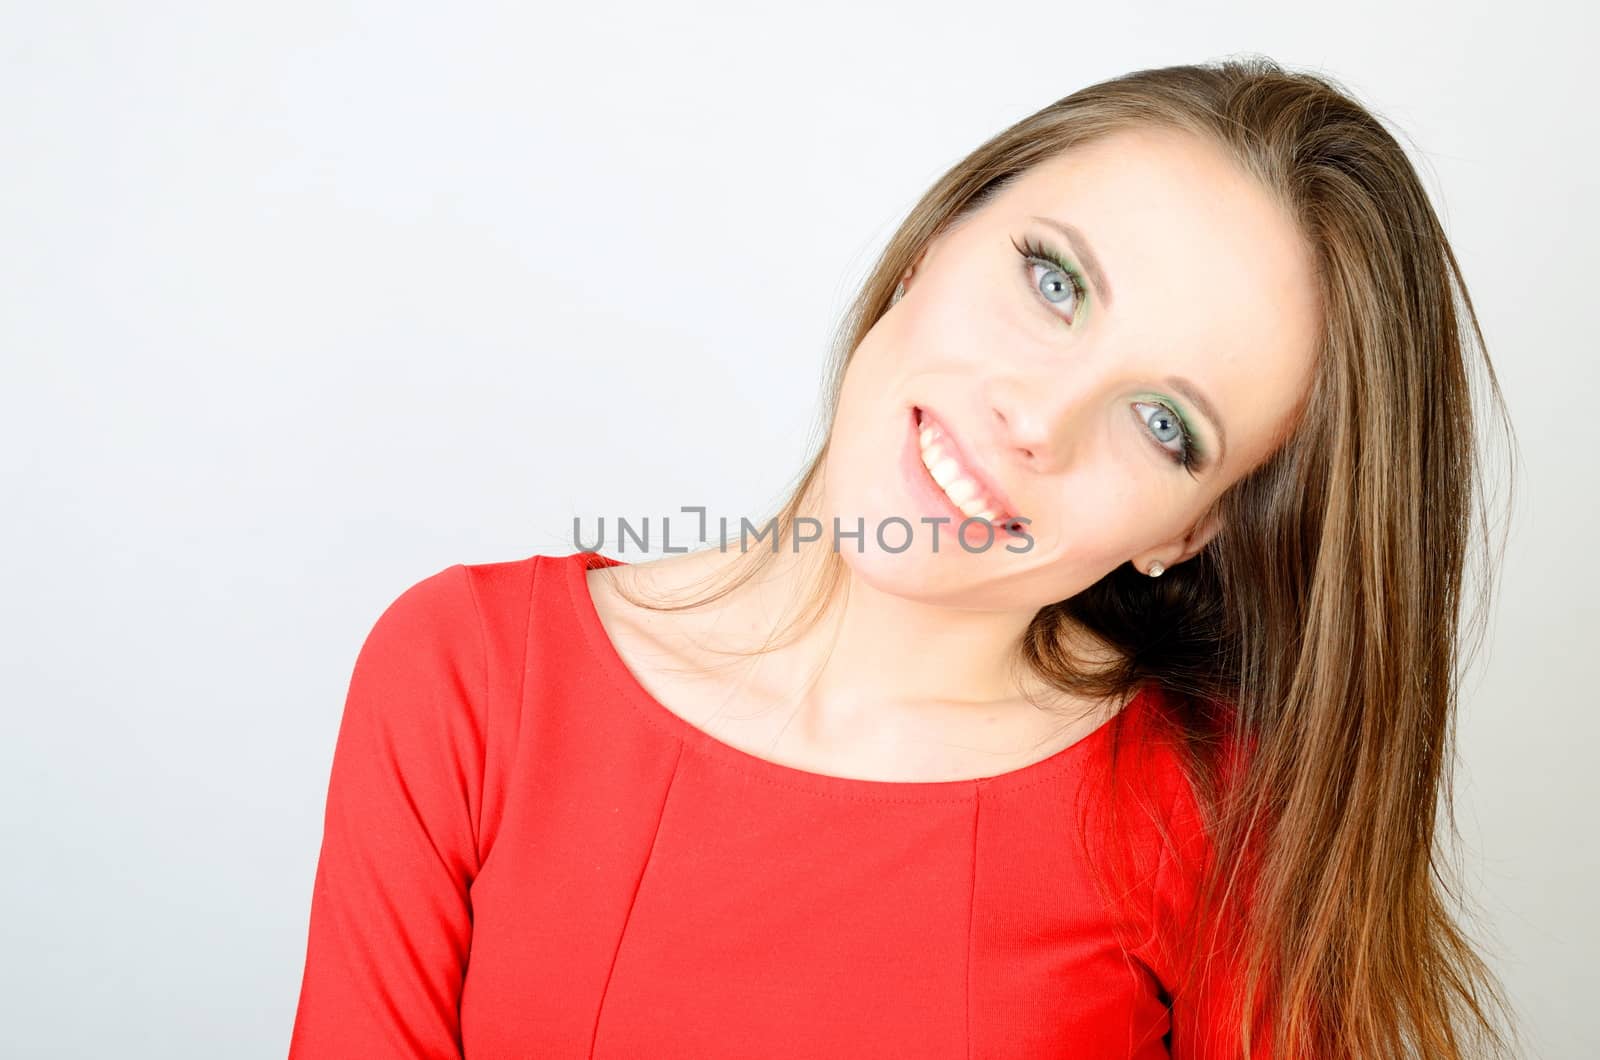 Portrait of young female model. Kind girl with smiling face. Model wearing red dress.  